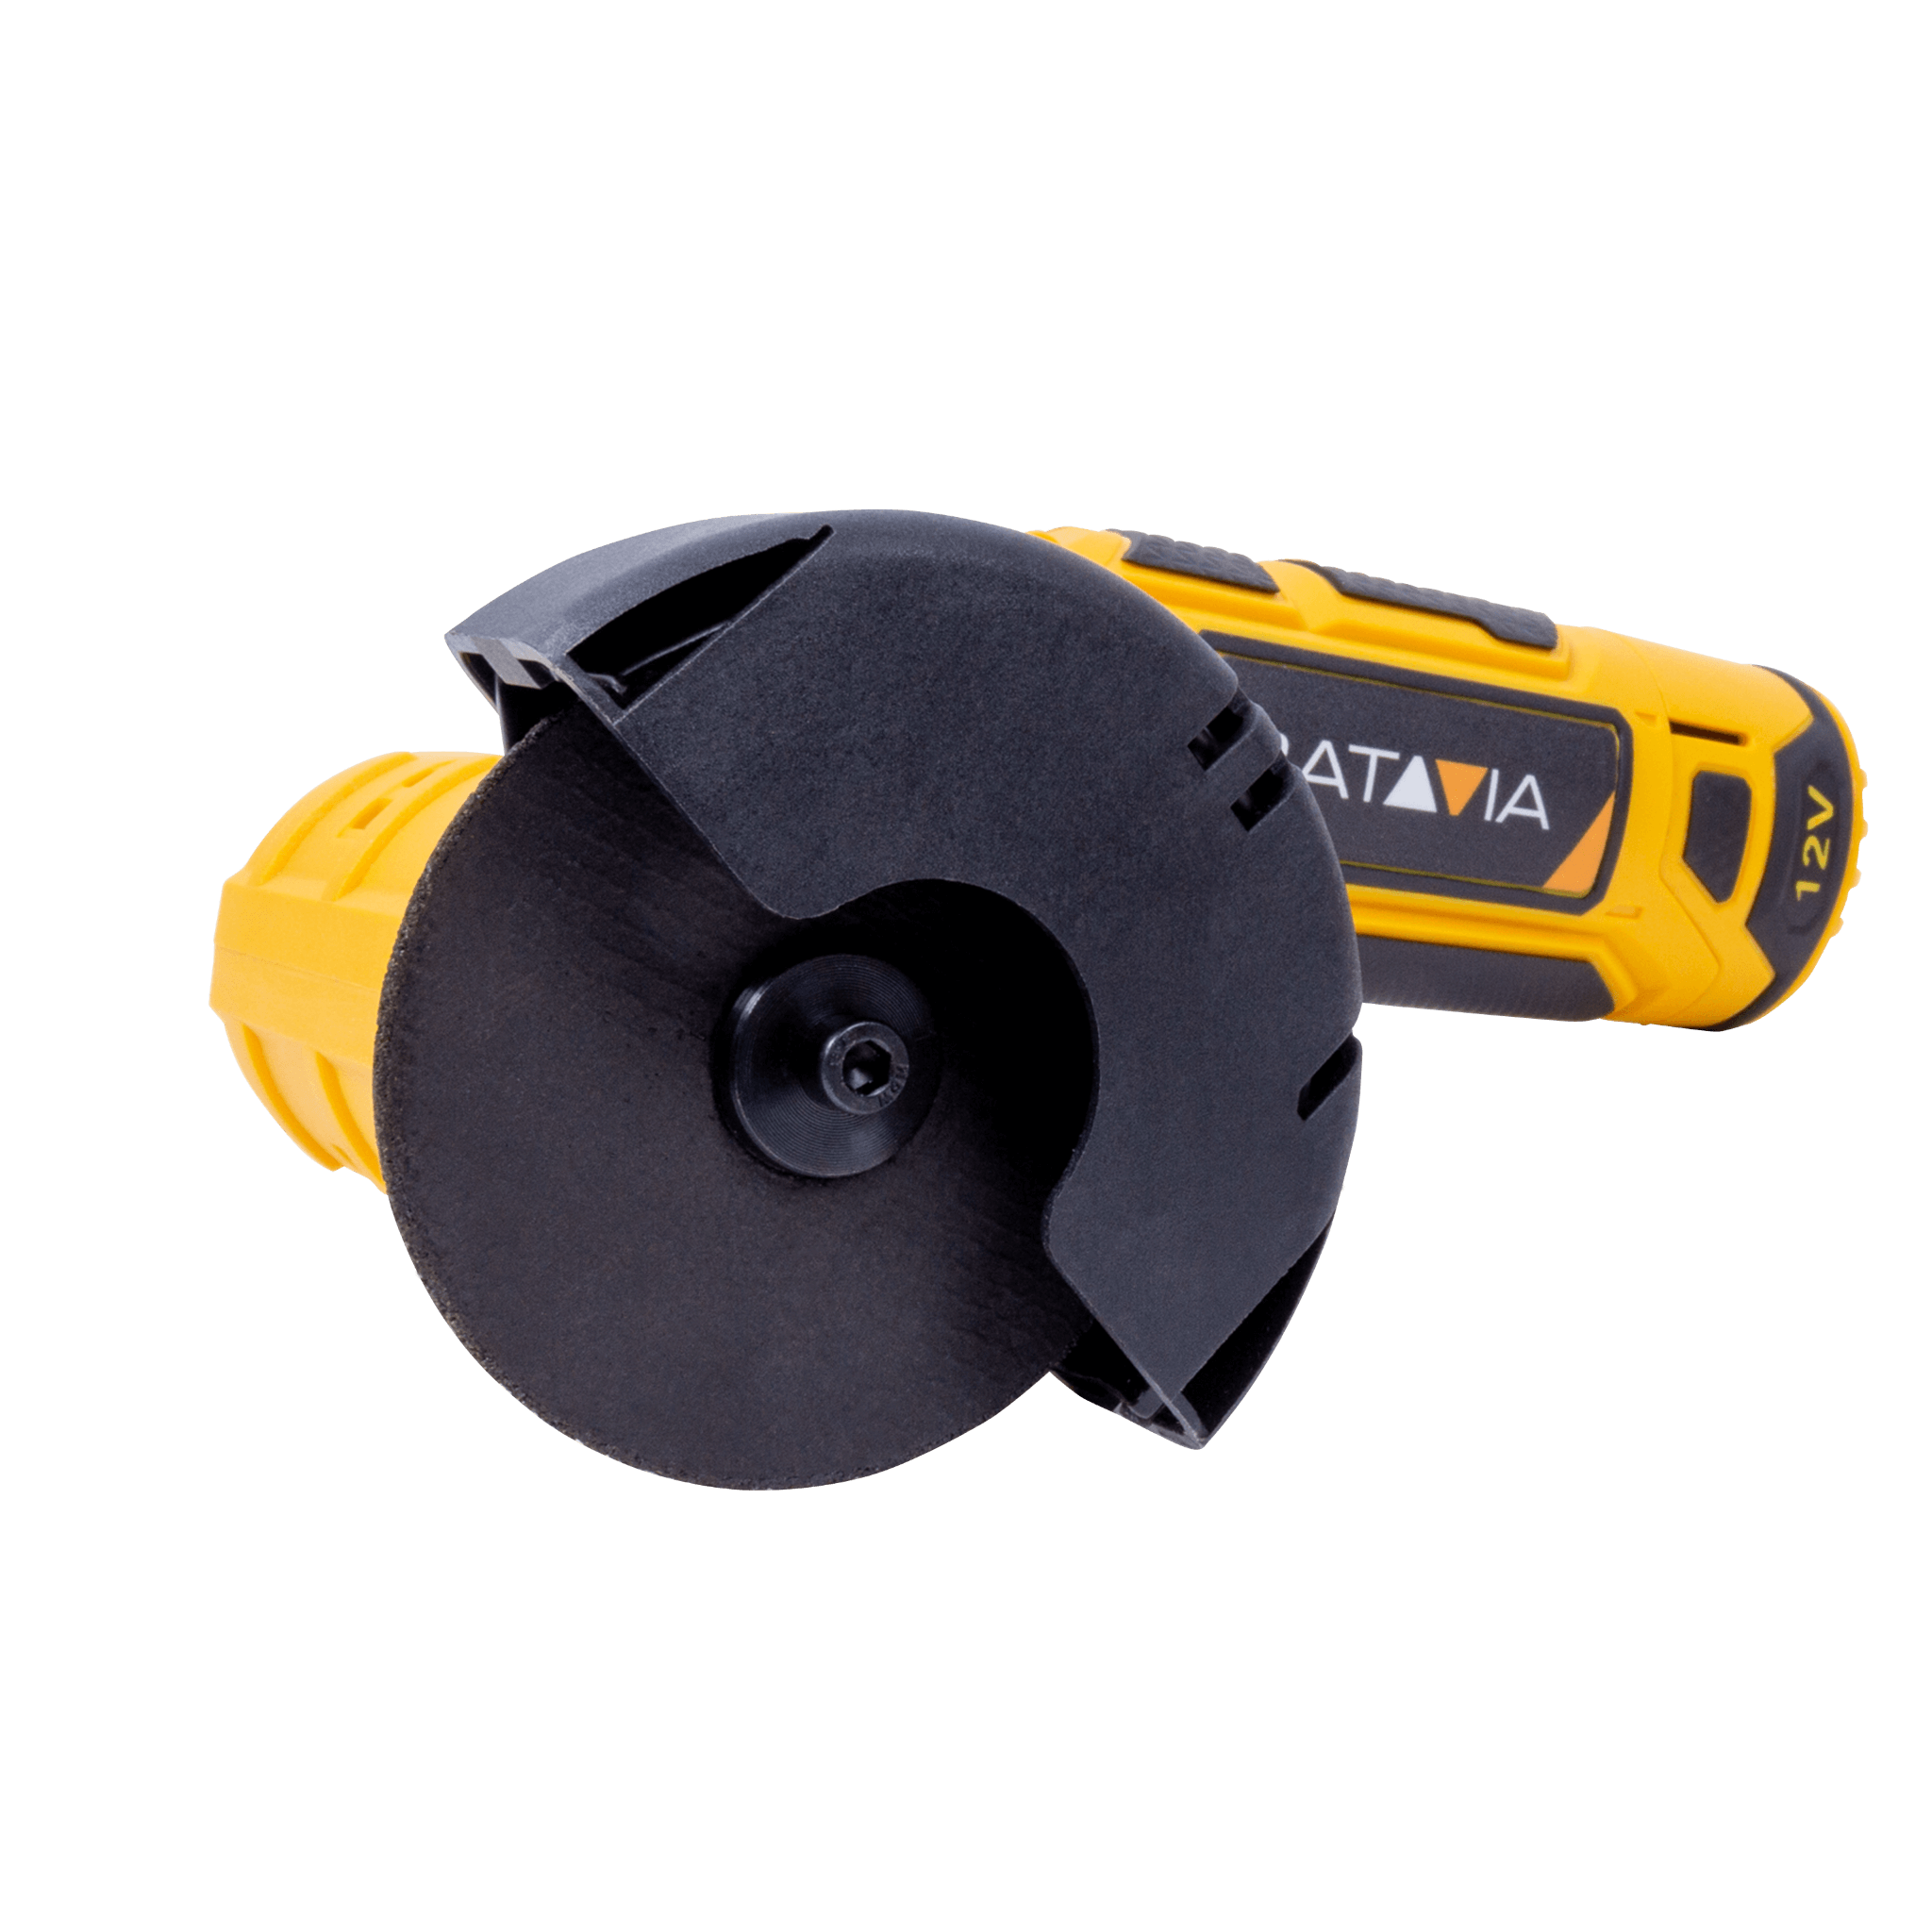 Cordless angle grinder | 12V Fixxpack collection | Batavia